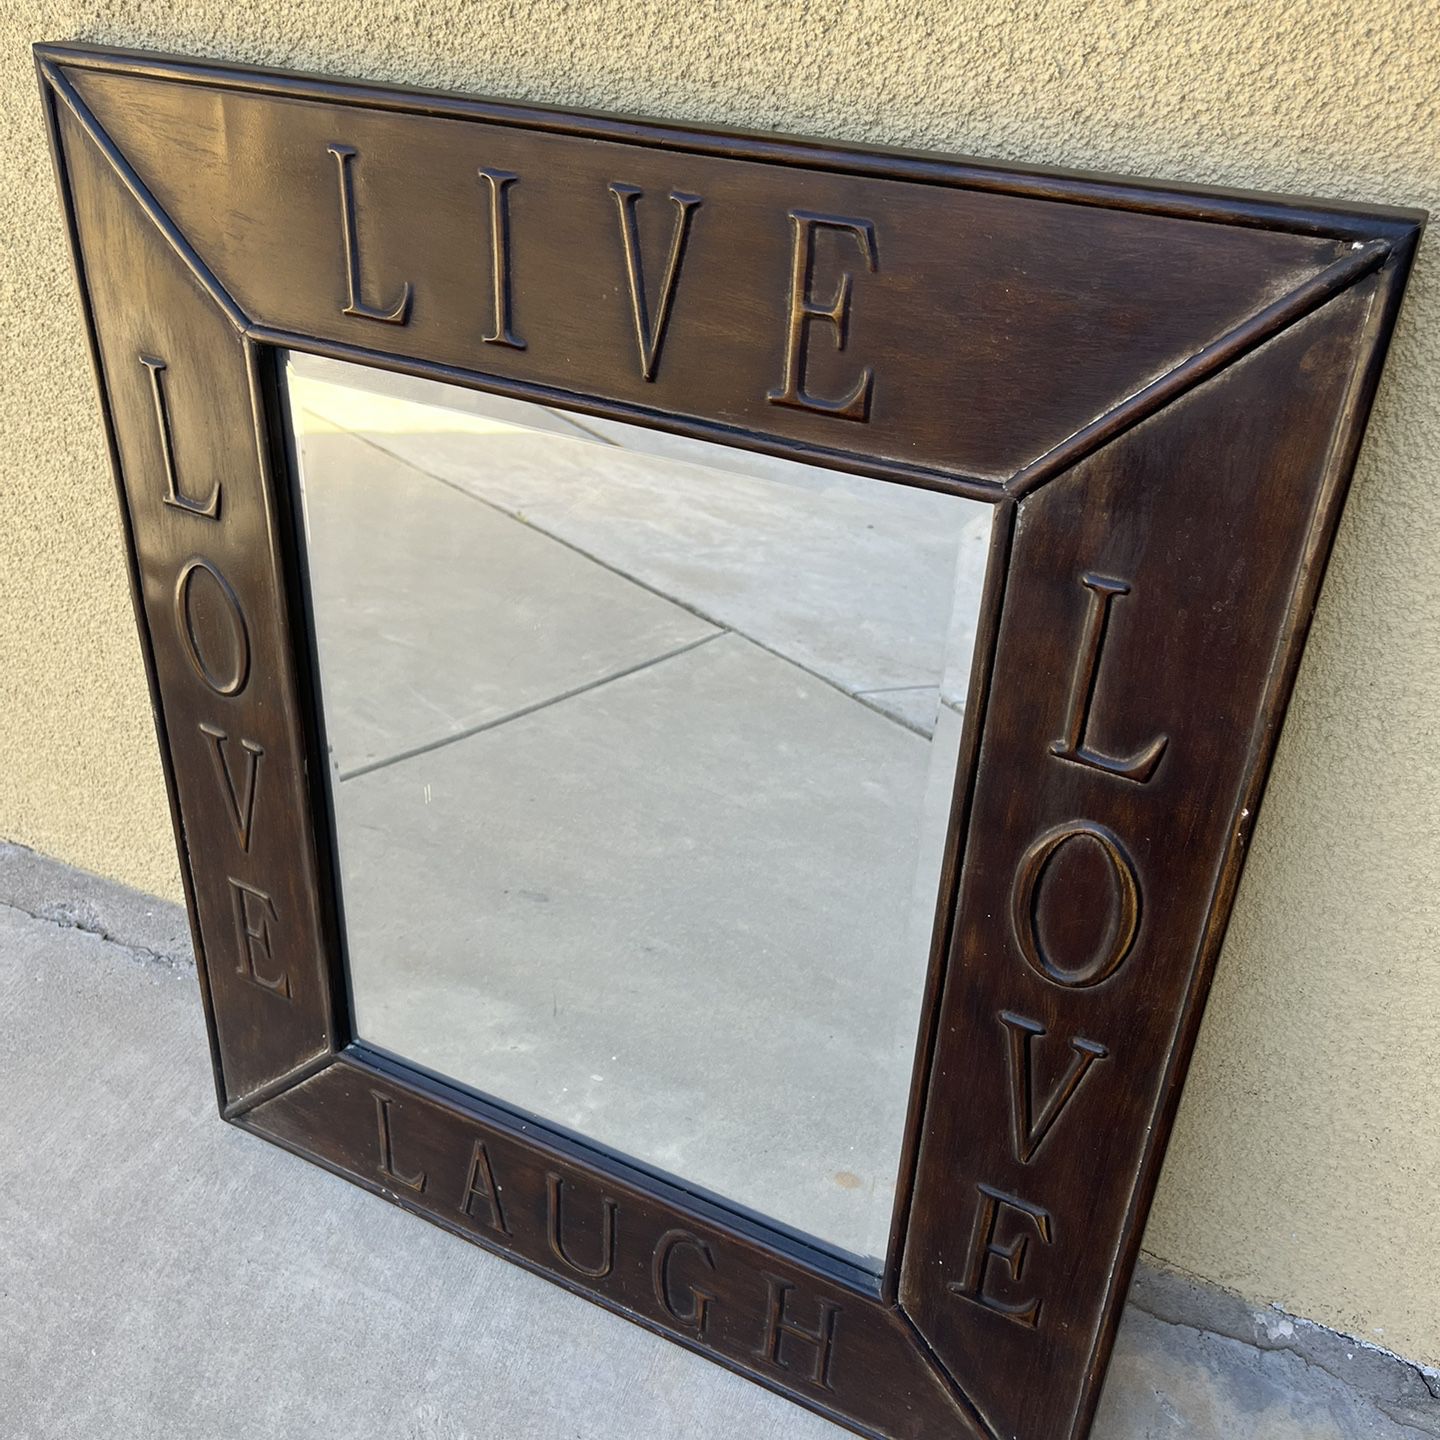 12x12 square rhinestone hanging mirror for Sale in West Covina, CA - OfferUp